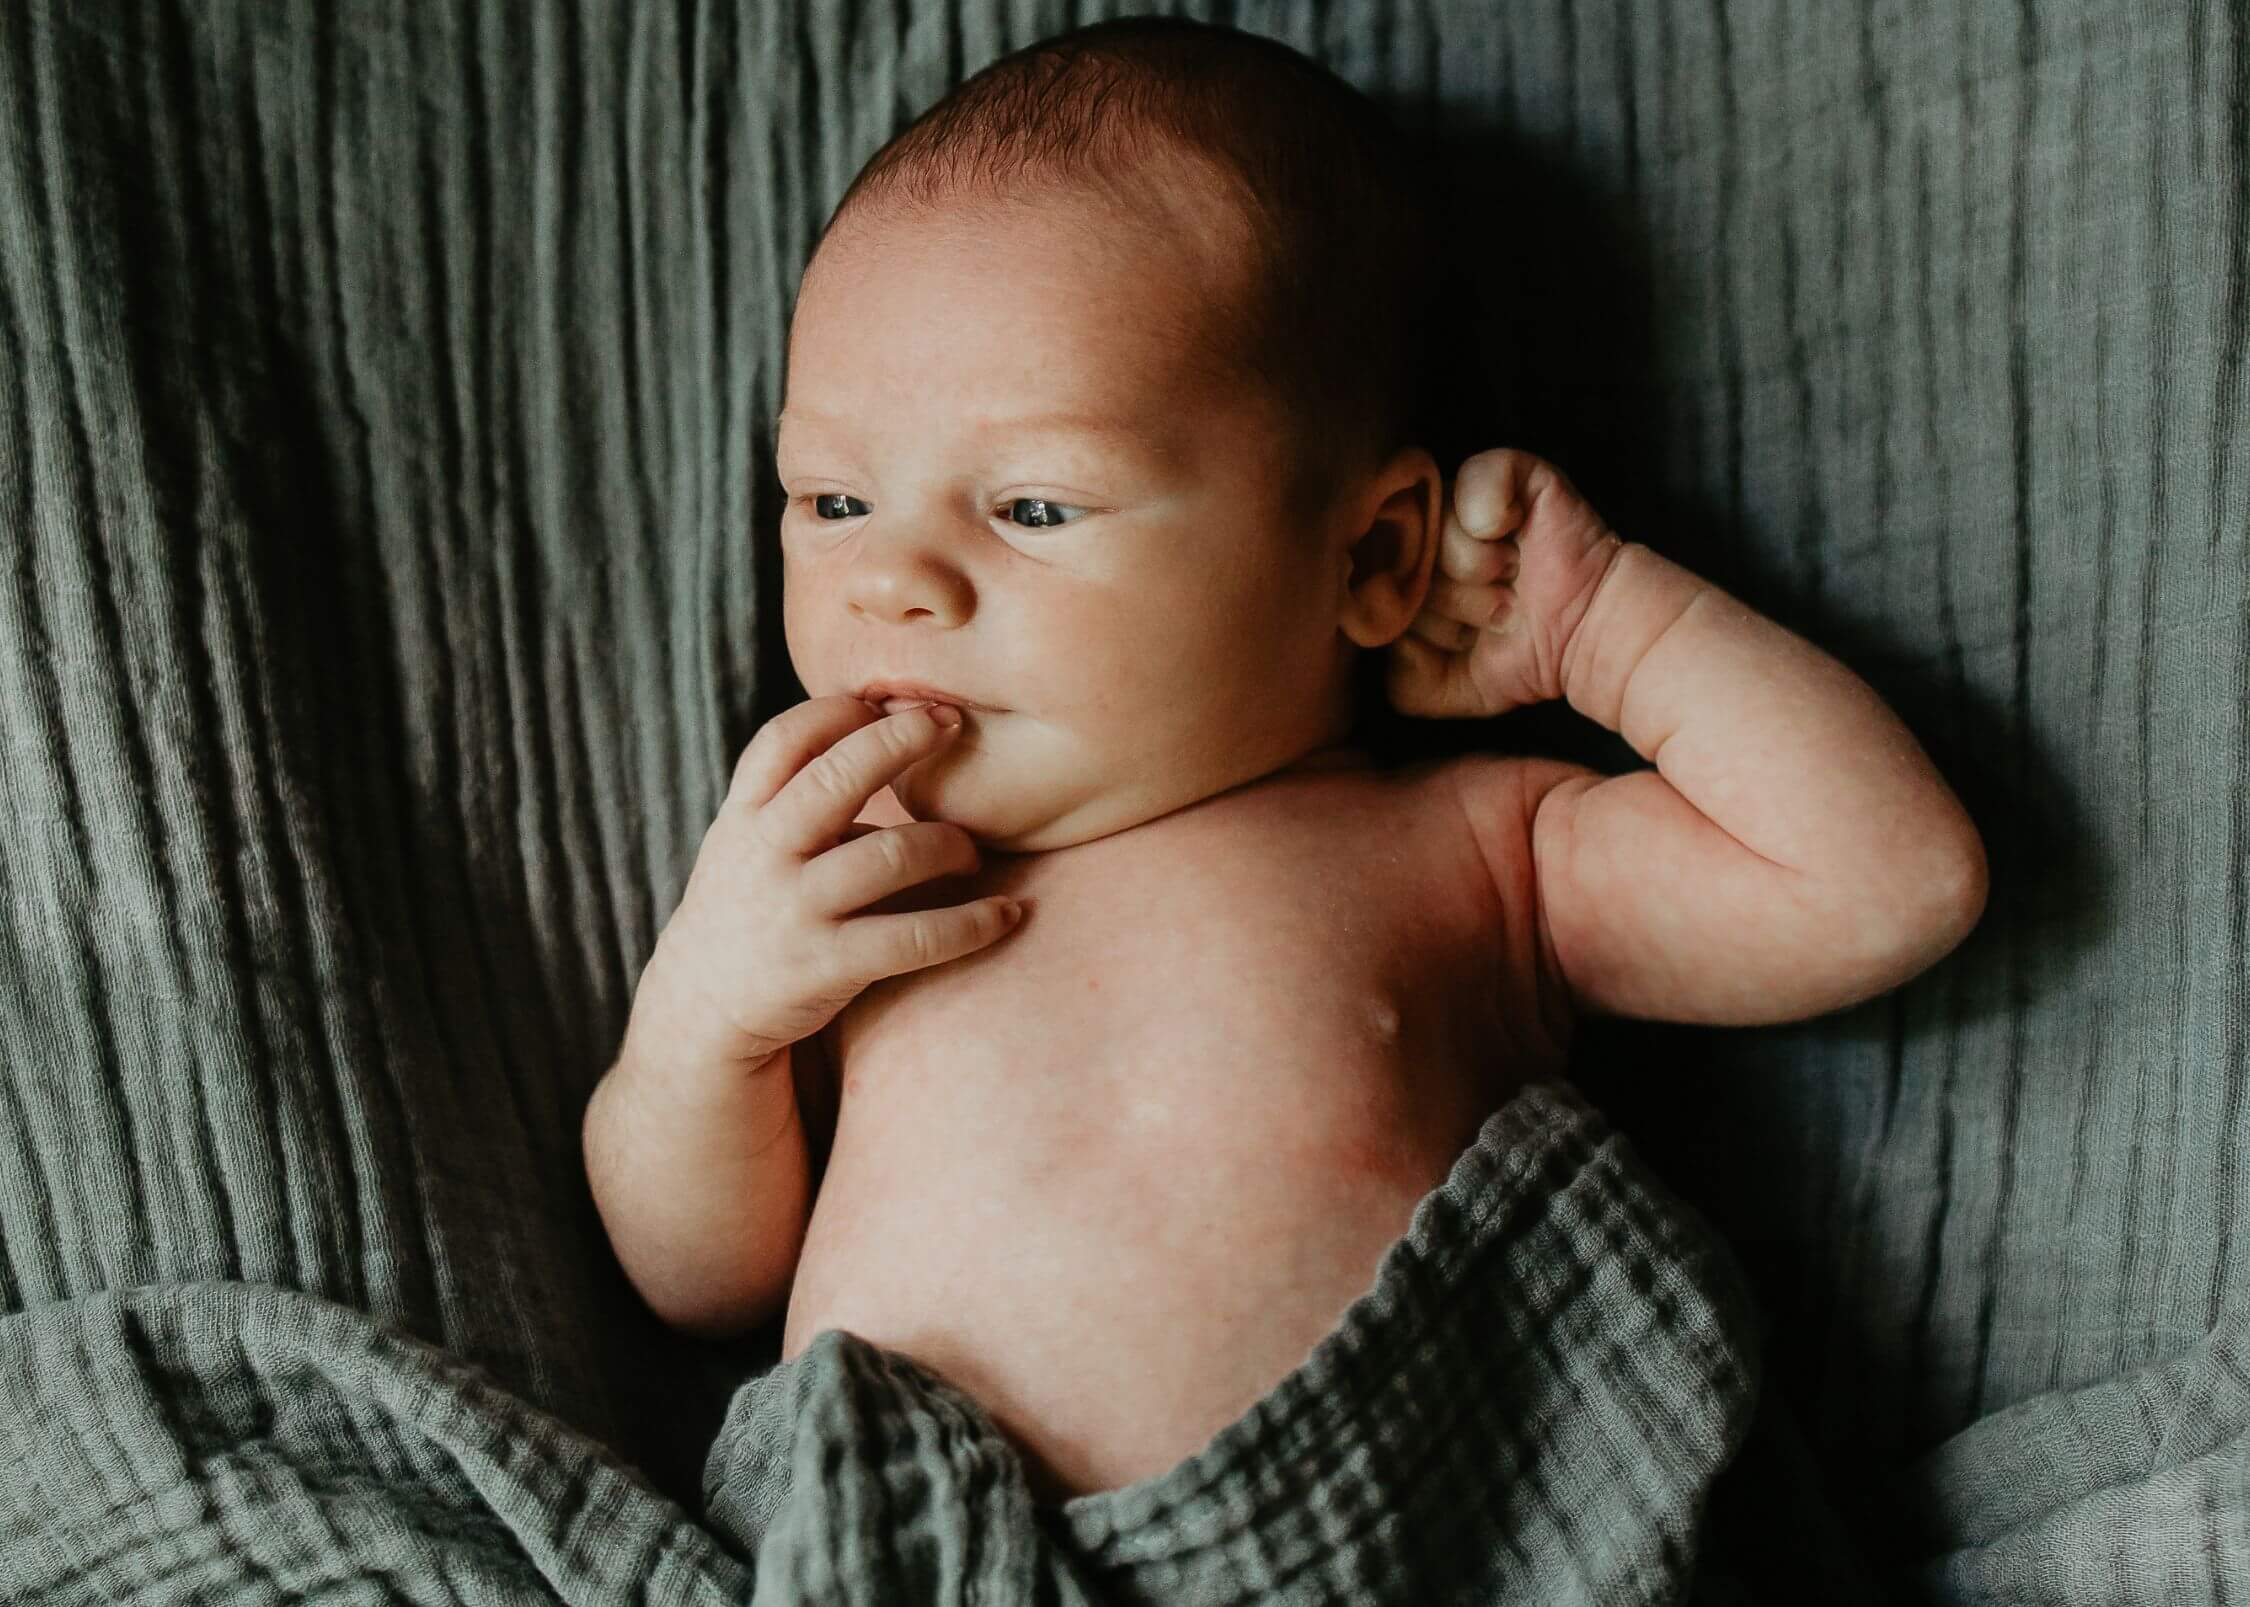 A newborn baby lays on a green blanket with eyes open thanks to lactation consultant pittsburgh